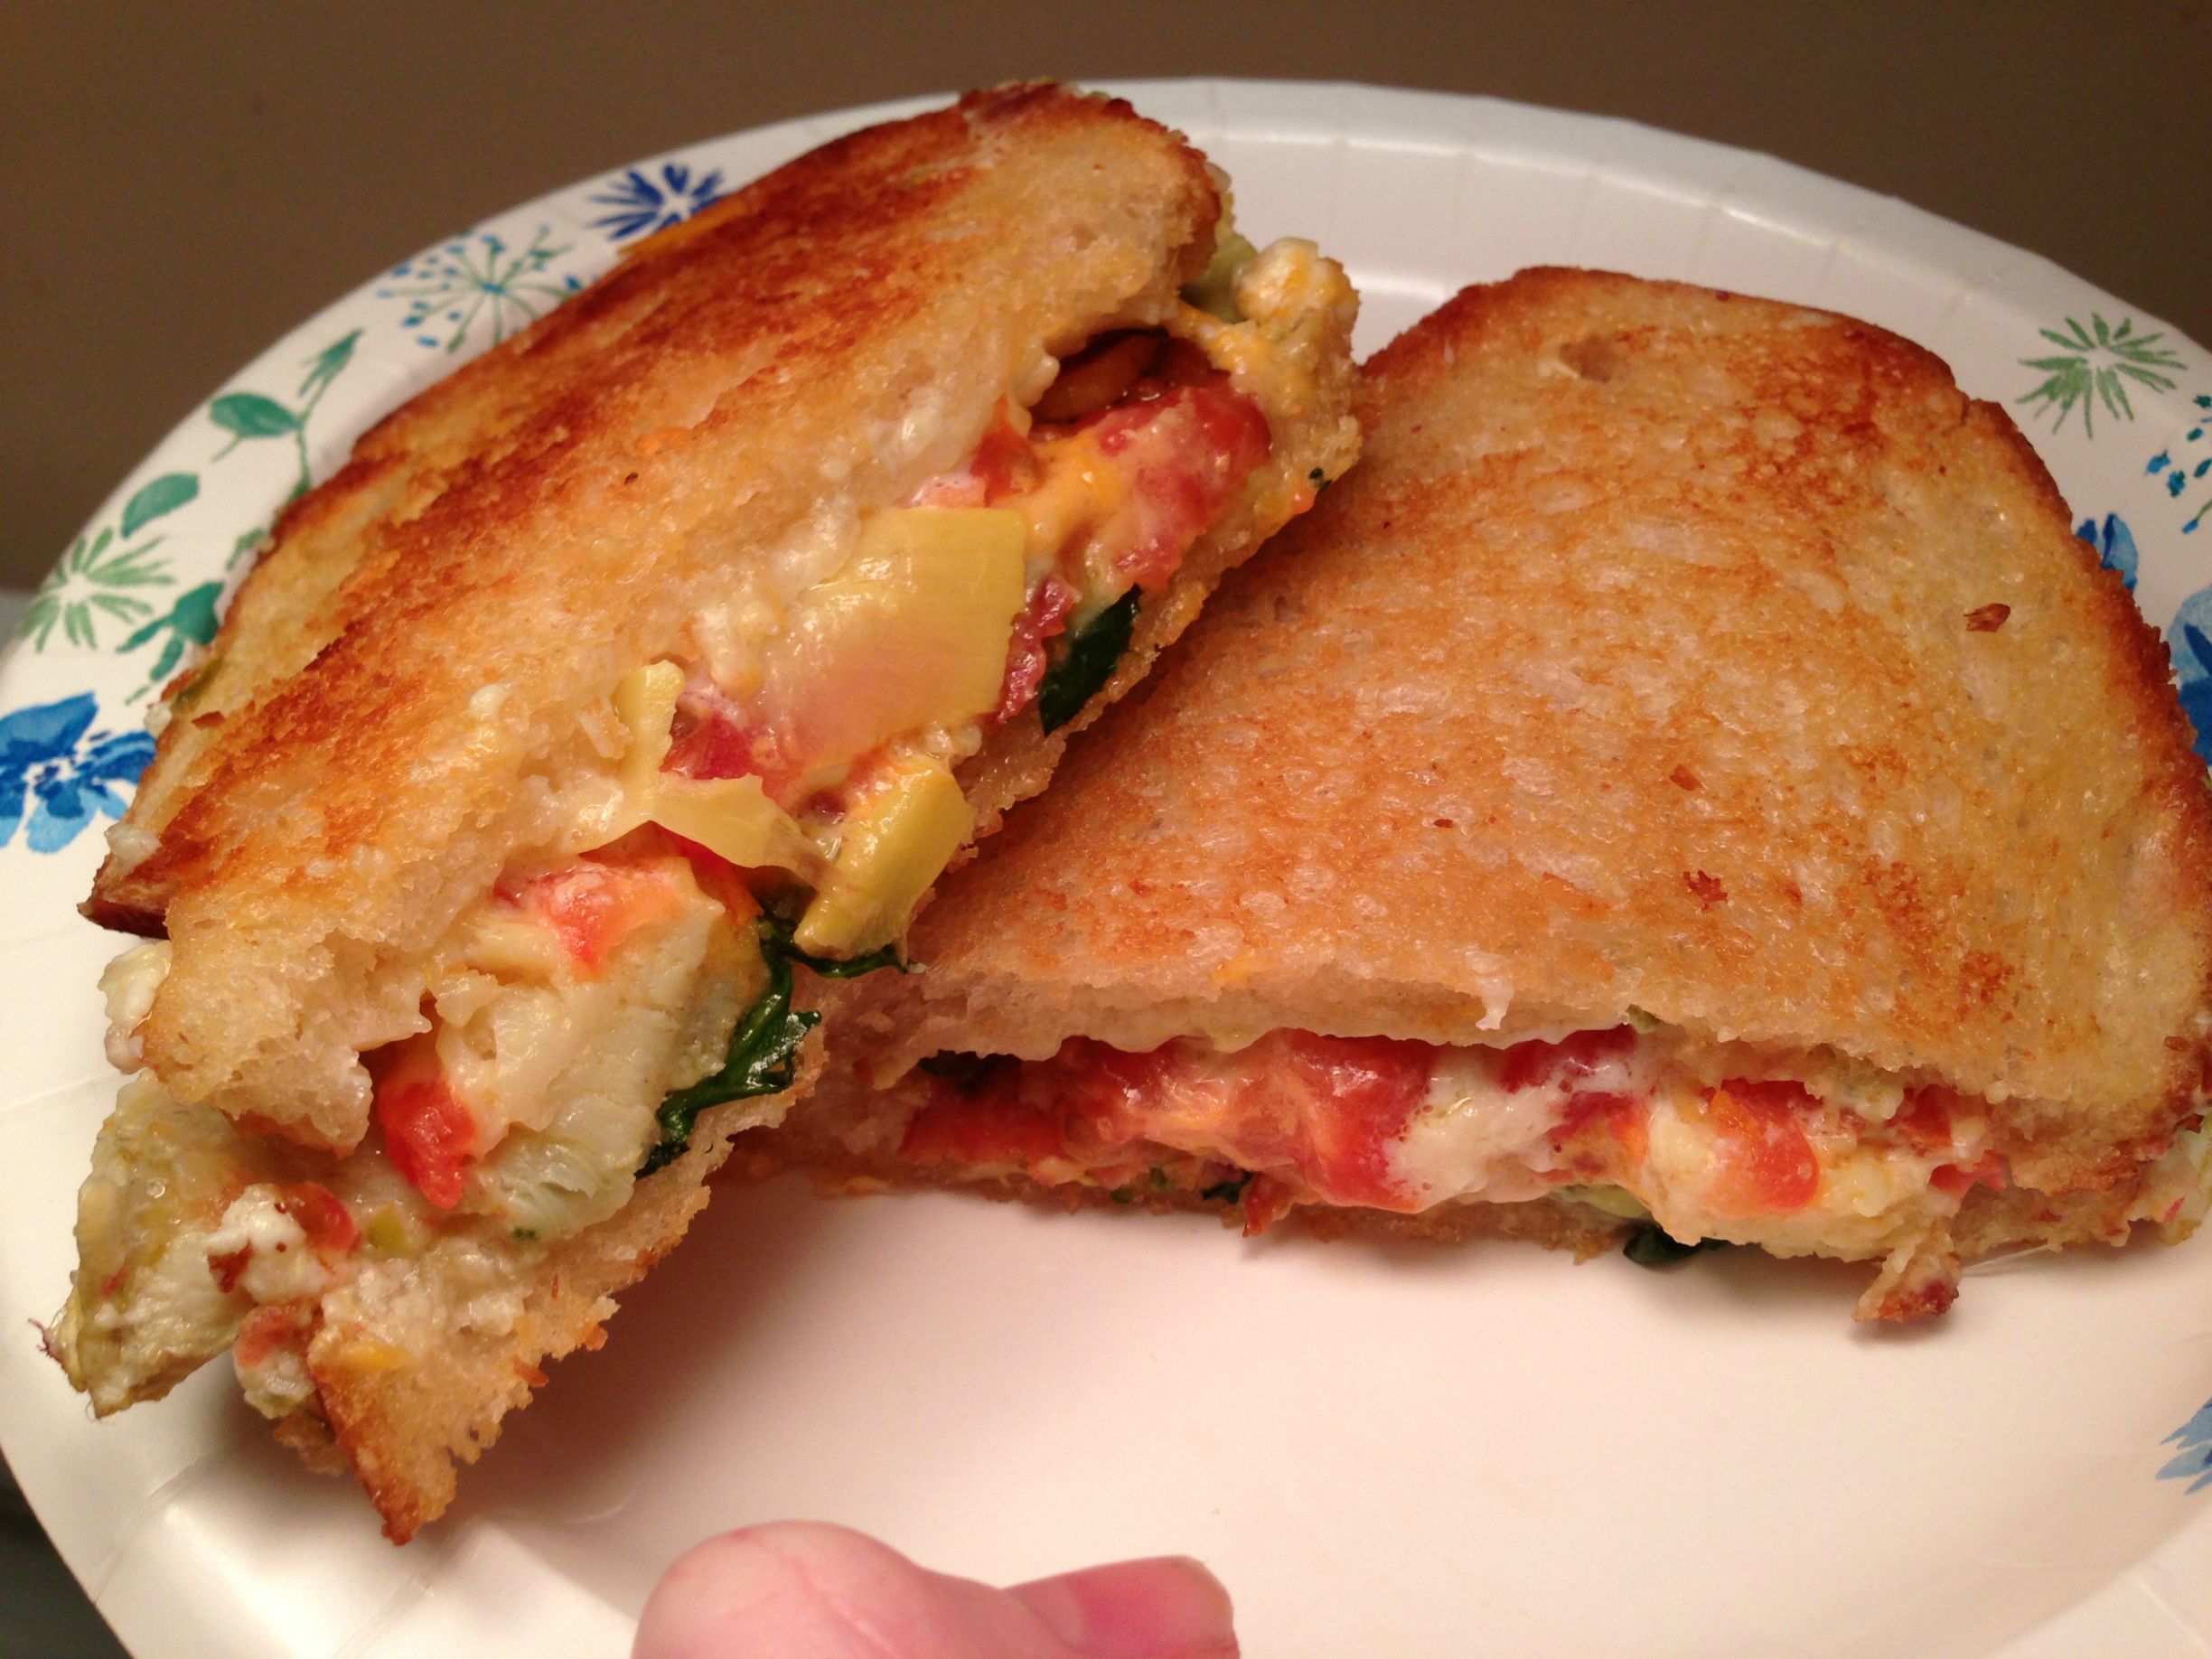 Overstuffed grilled cheese with cream cheese, cheddar, Parmesan, bacon, artichoke, jalapeno, tomato, and spinach